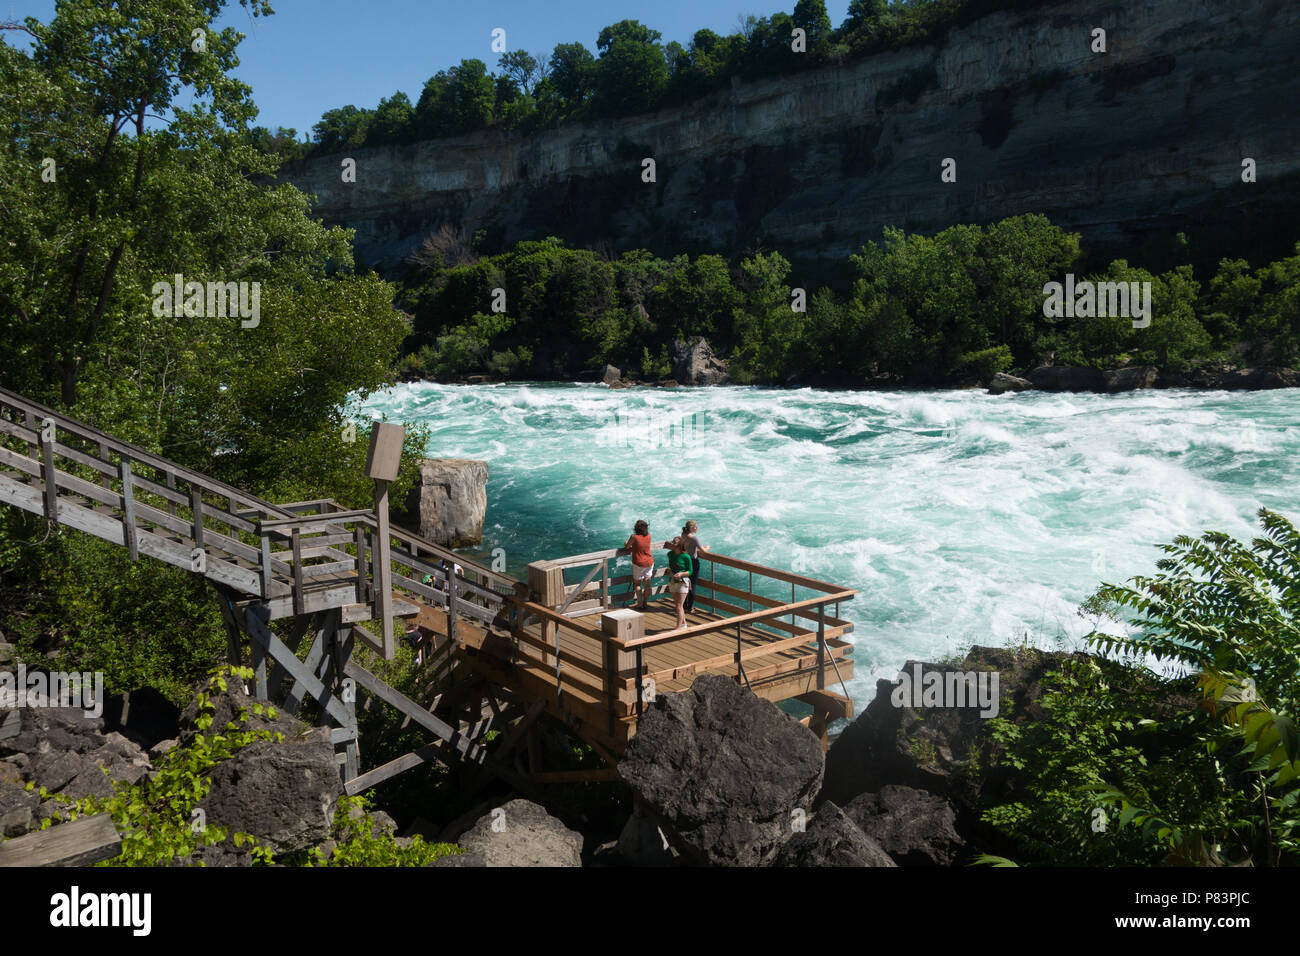 the Niagara River’s Class 6 white-water rapids as seen from the White Water Walk attraction in the Niagara Gorge at Niagara Falls, Ontario, Canada Stock Photo